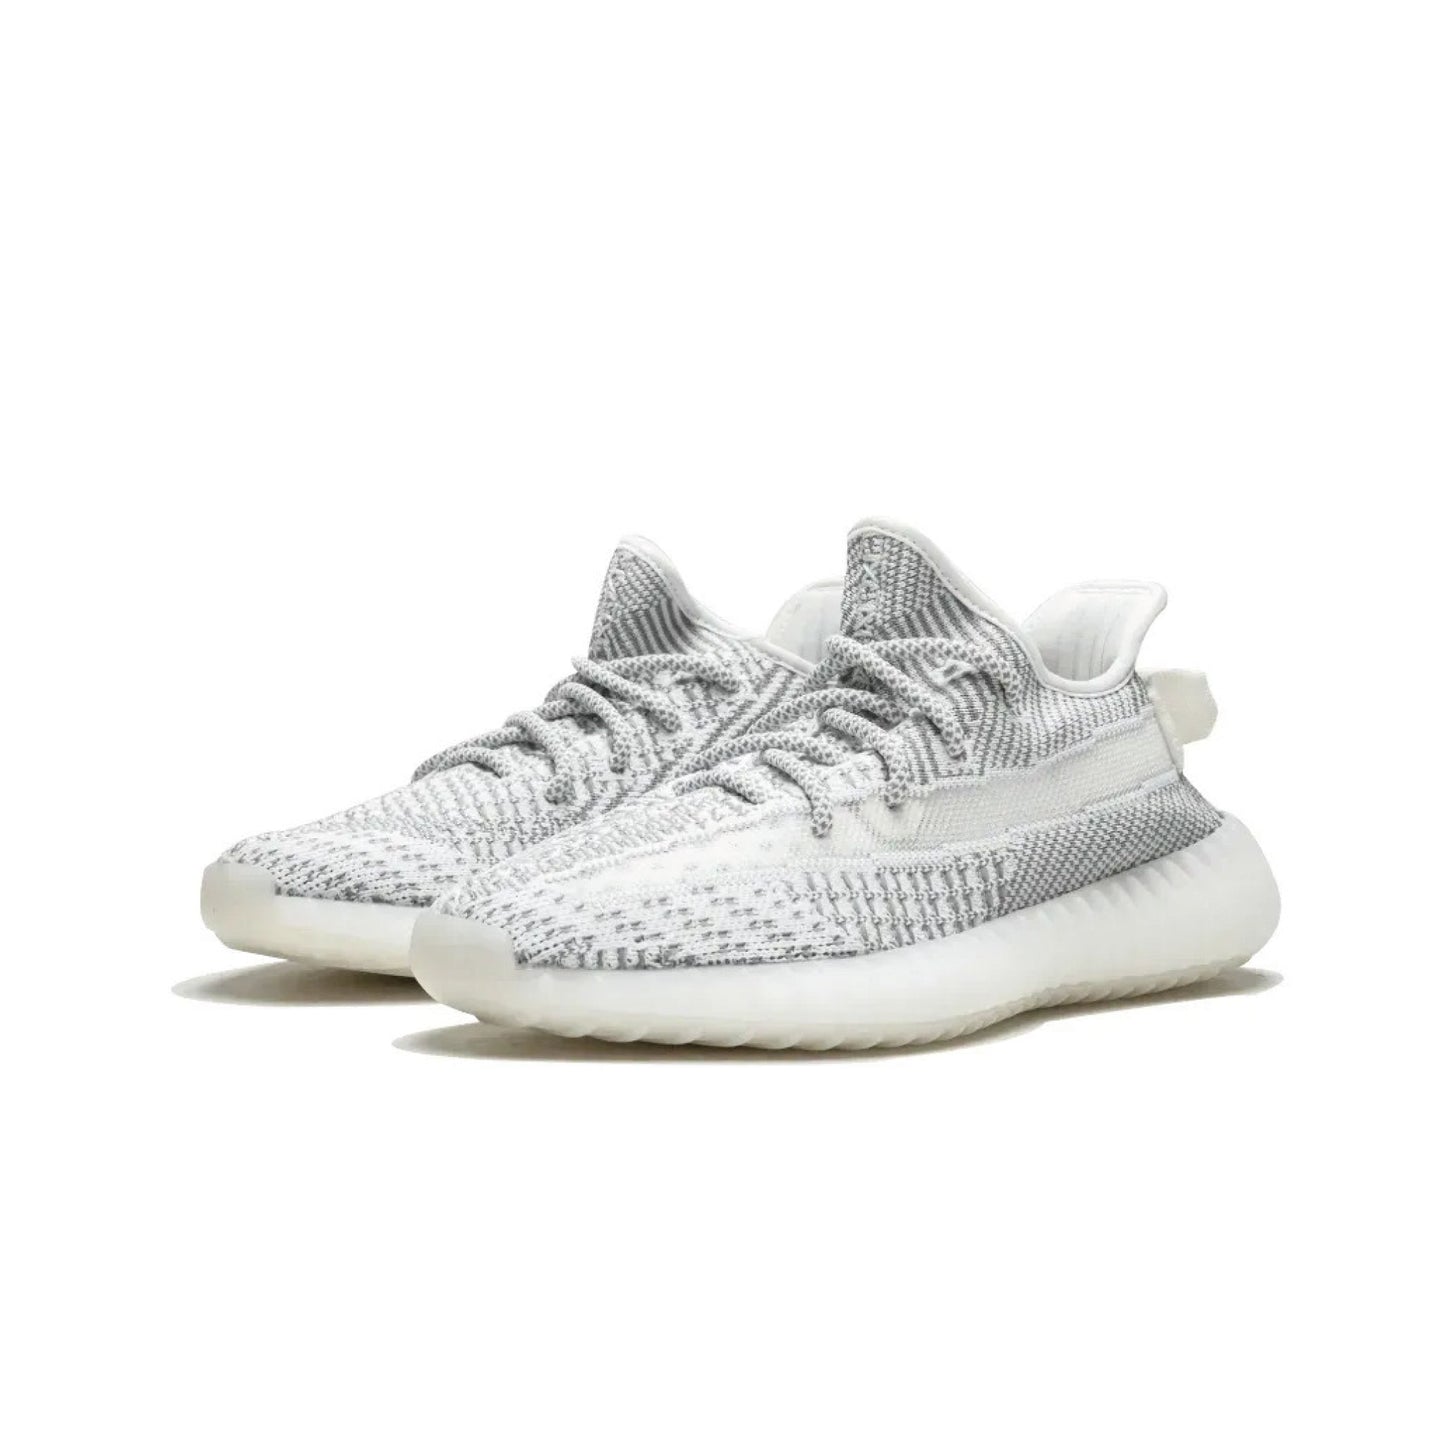 Adidas Yeezy Boost 350 V2 Static (Non-Reflective) - 48h